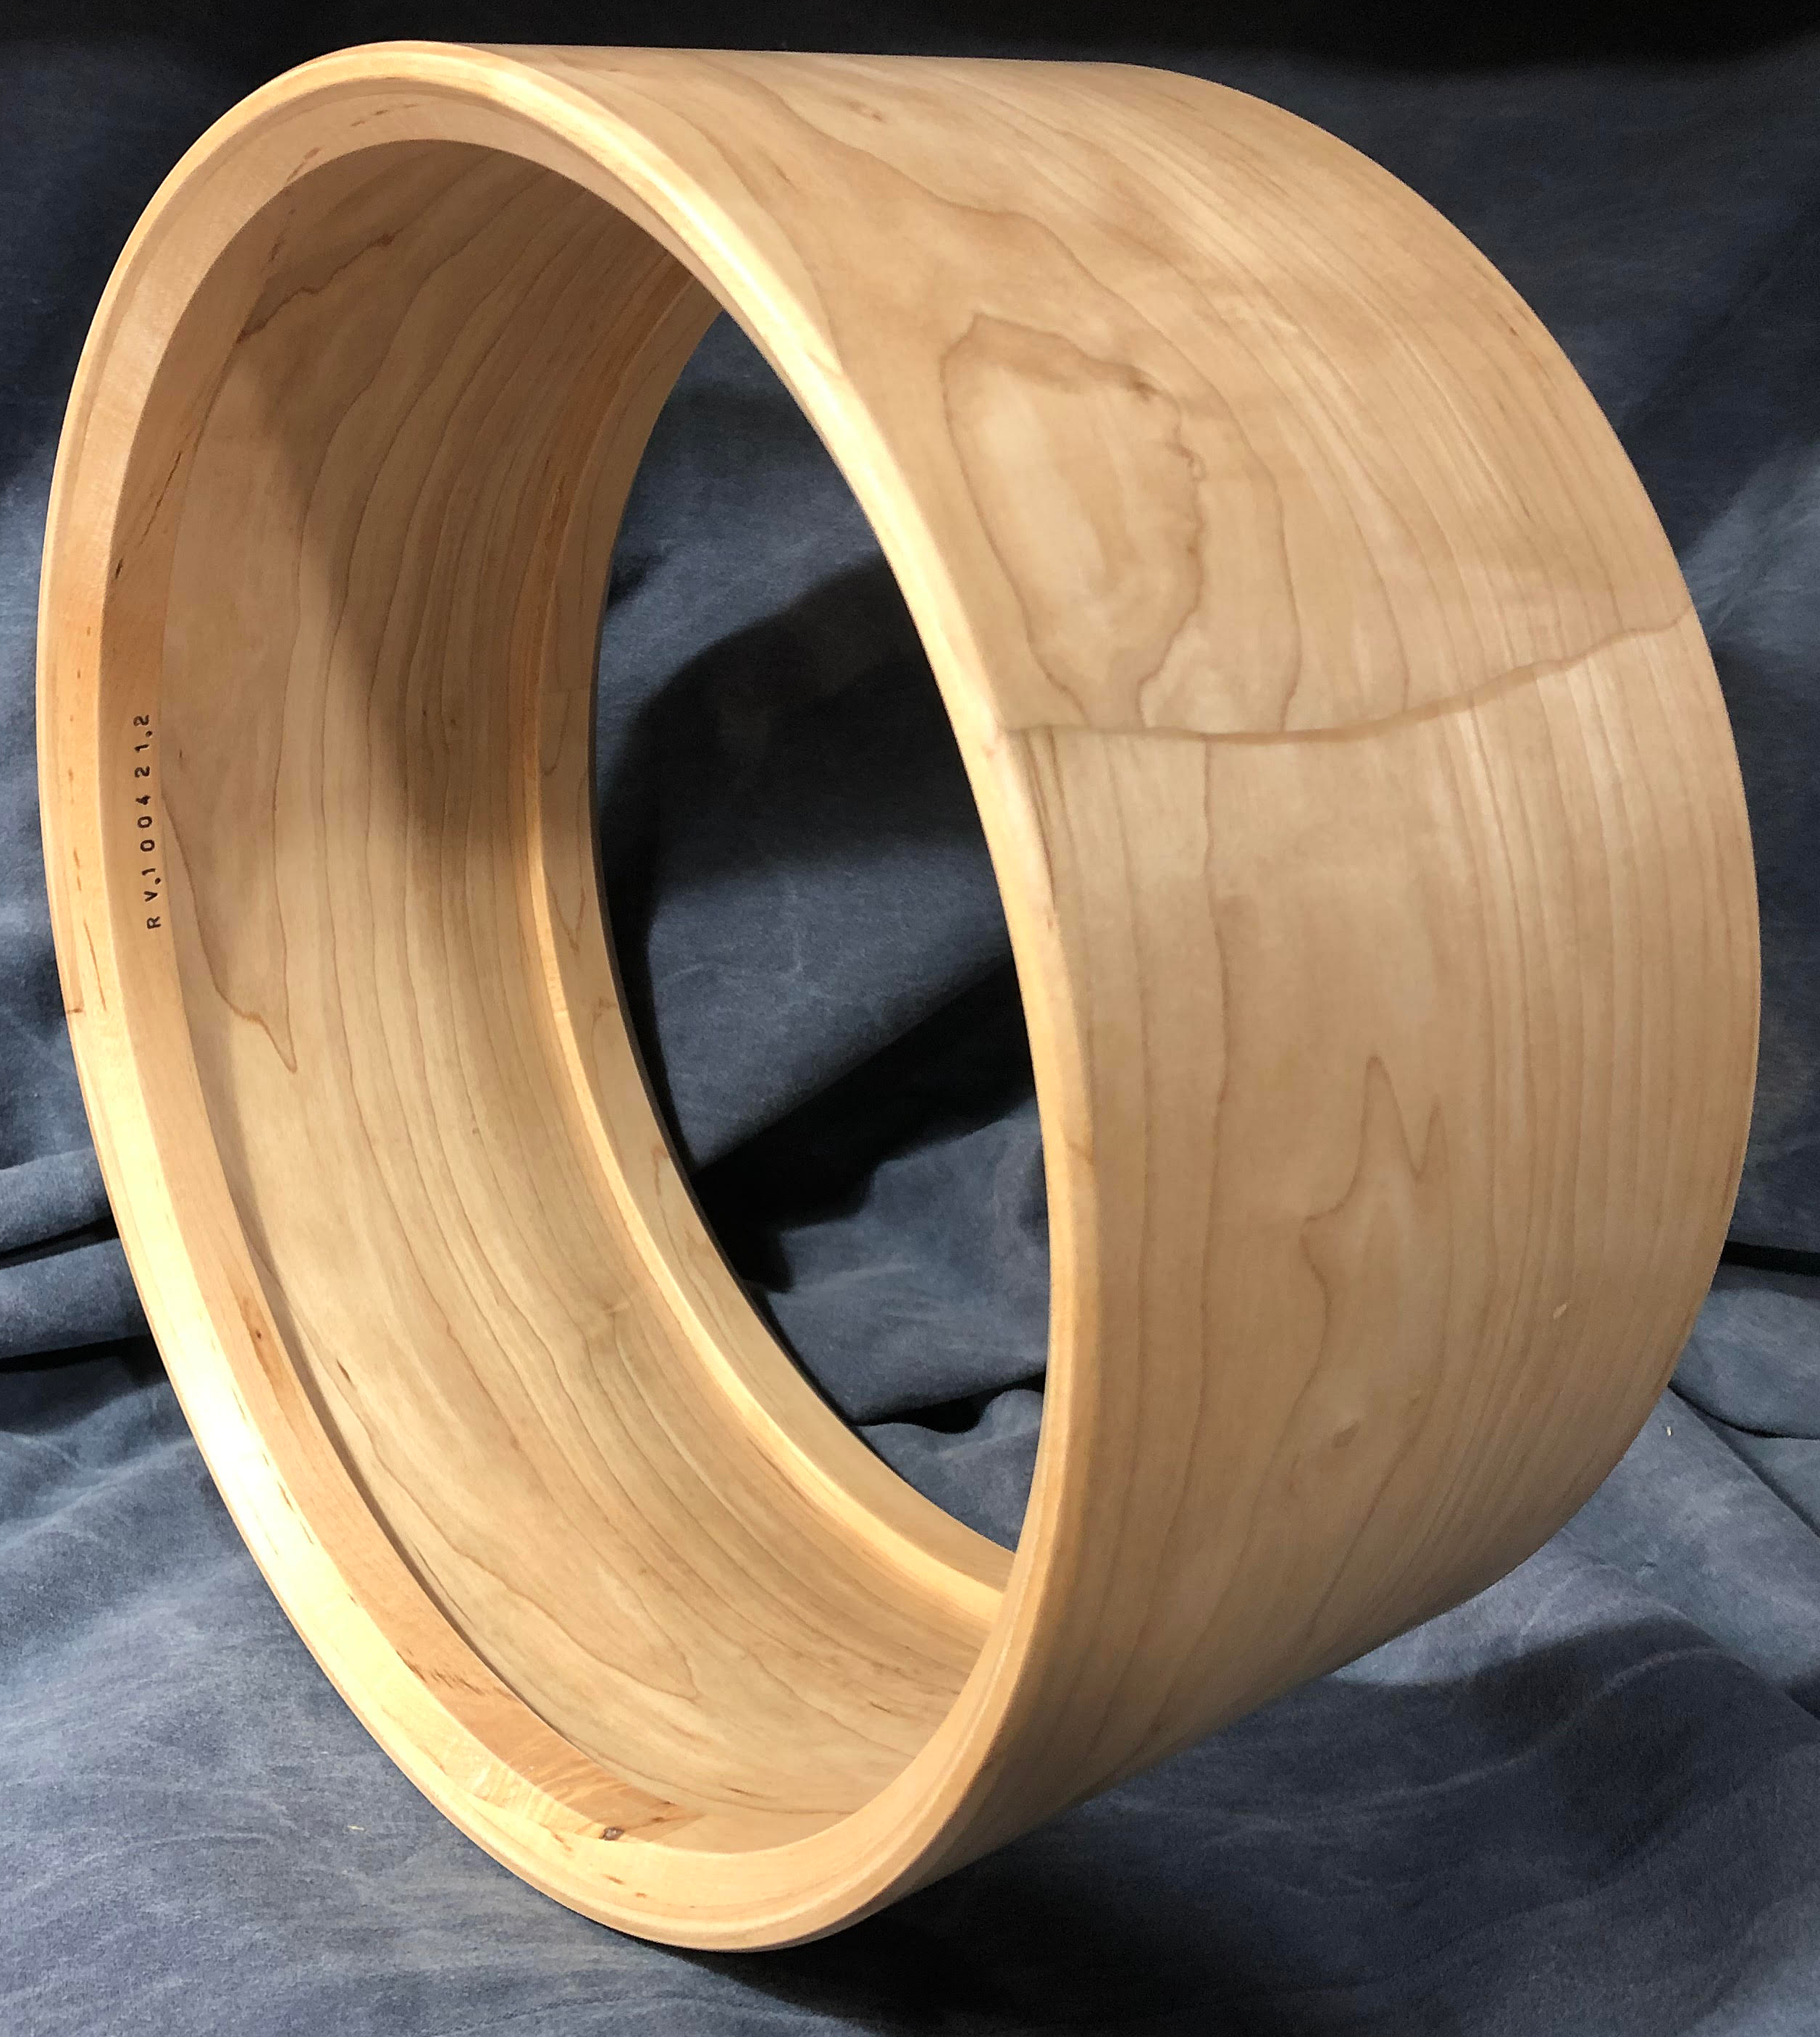 RV.100421.2   Steam Bent Solid Maple Shell, with Maple Reinforcing Hoops  6 1/2" x 14"